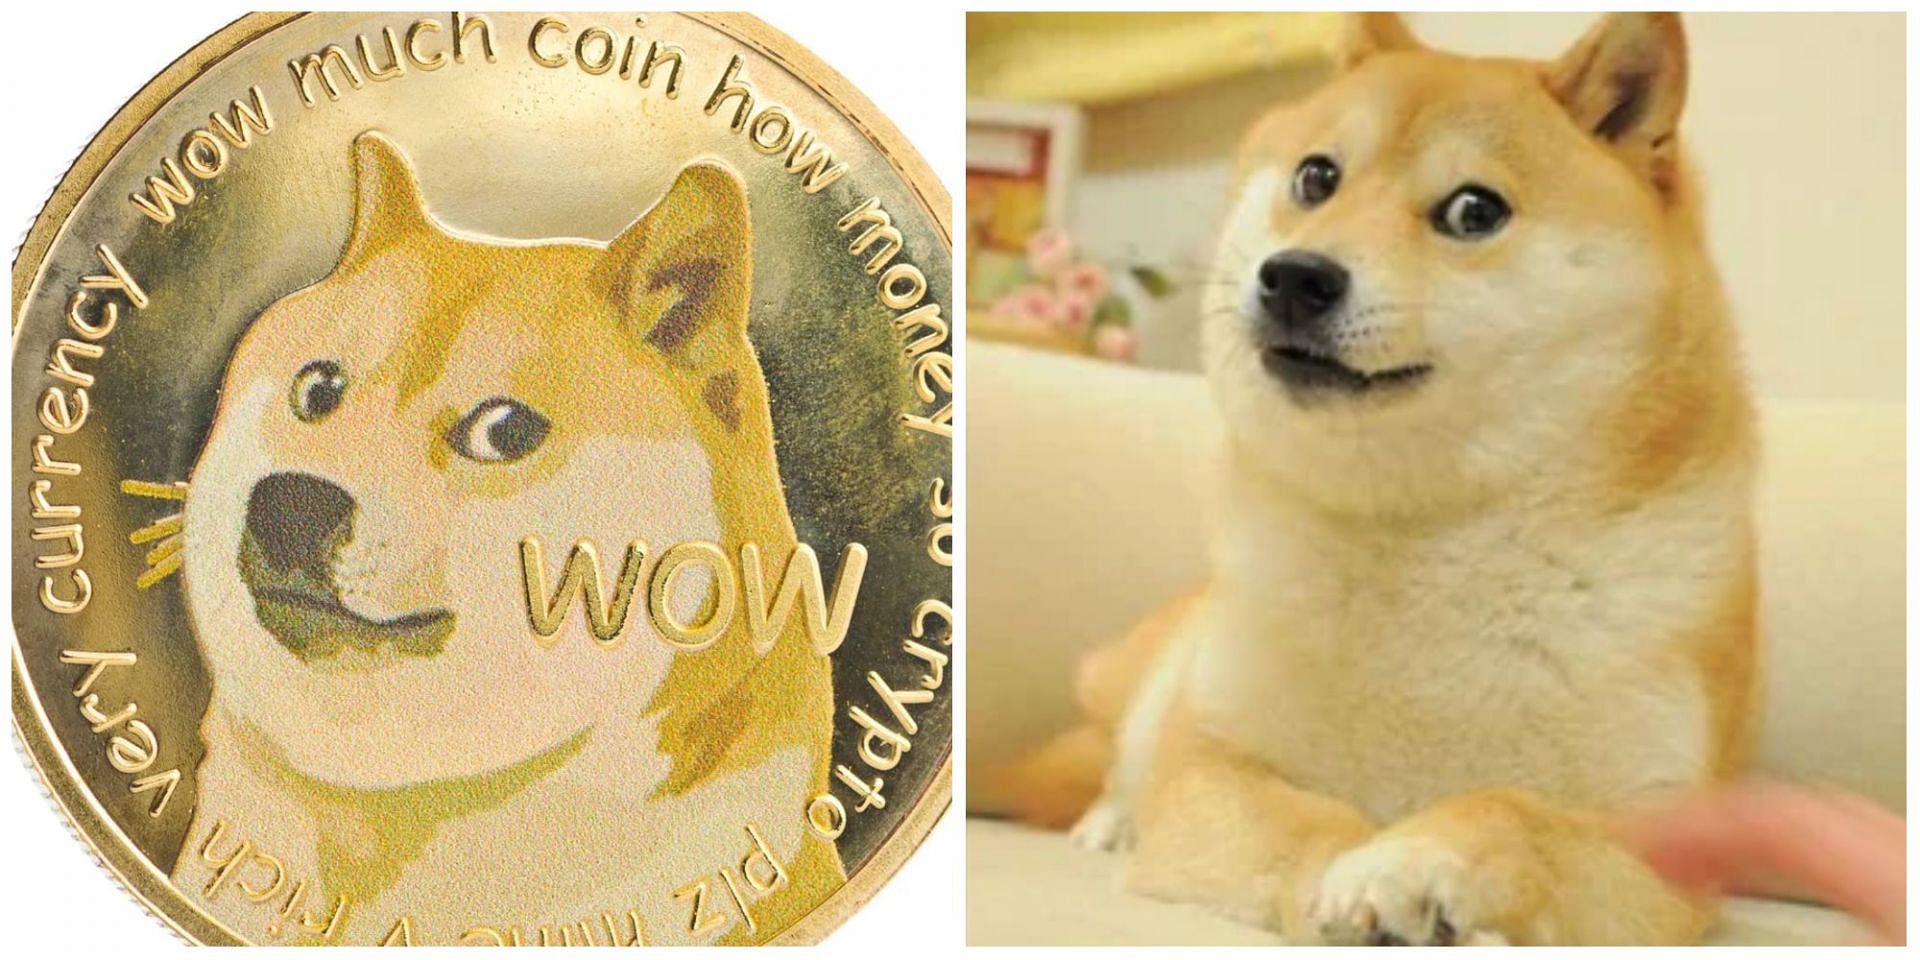 The owner of the doge meme dog recently announced that she has a liver disease and Leukemia. (Image via Getty Images)